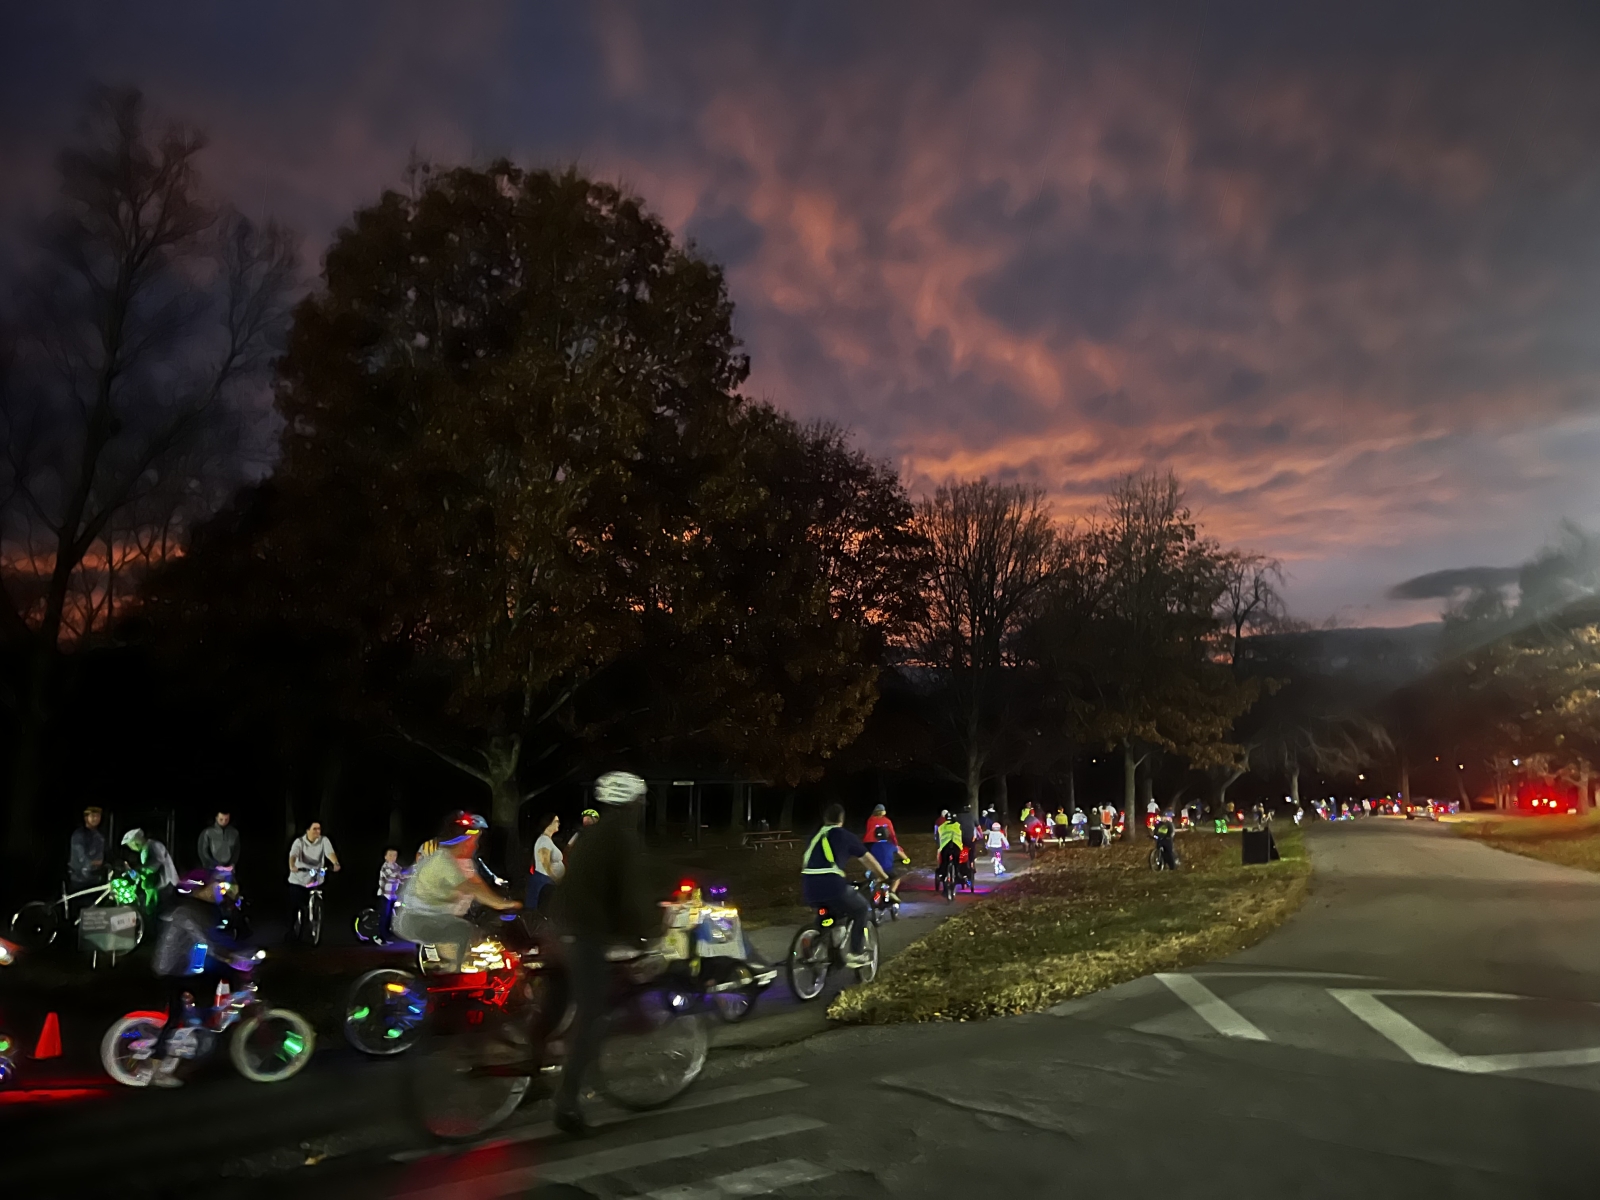 Cyclists get ready to ride a light path at dusk during Lex Glow Ride